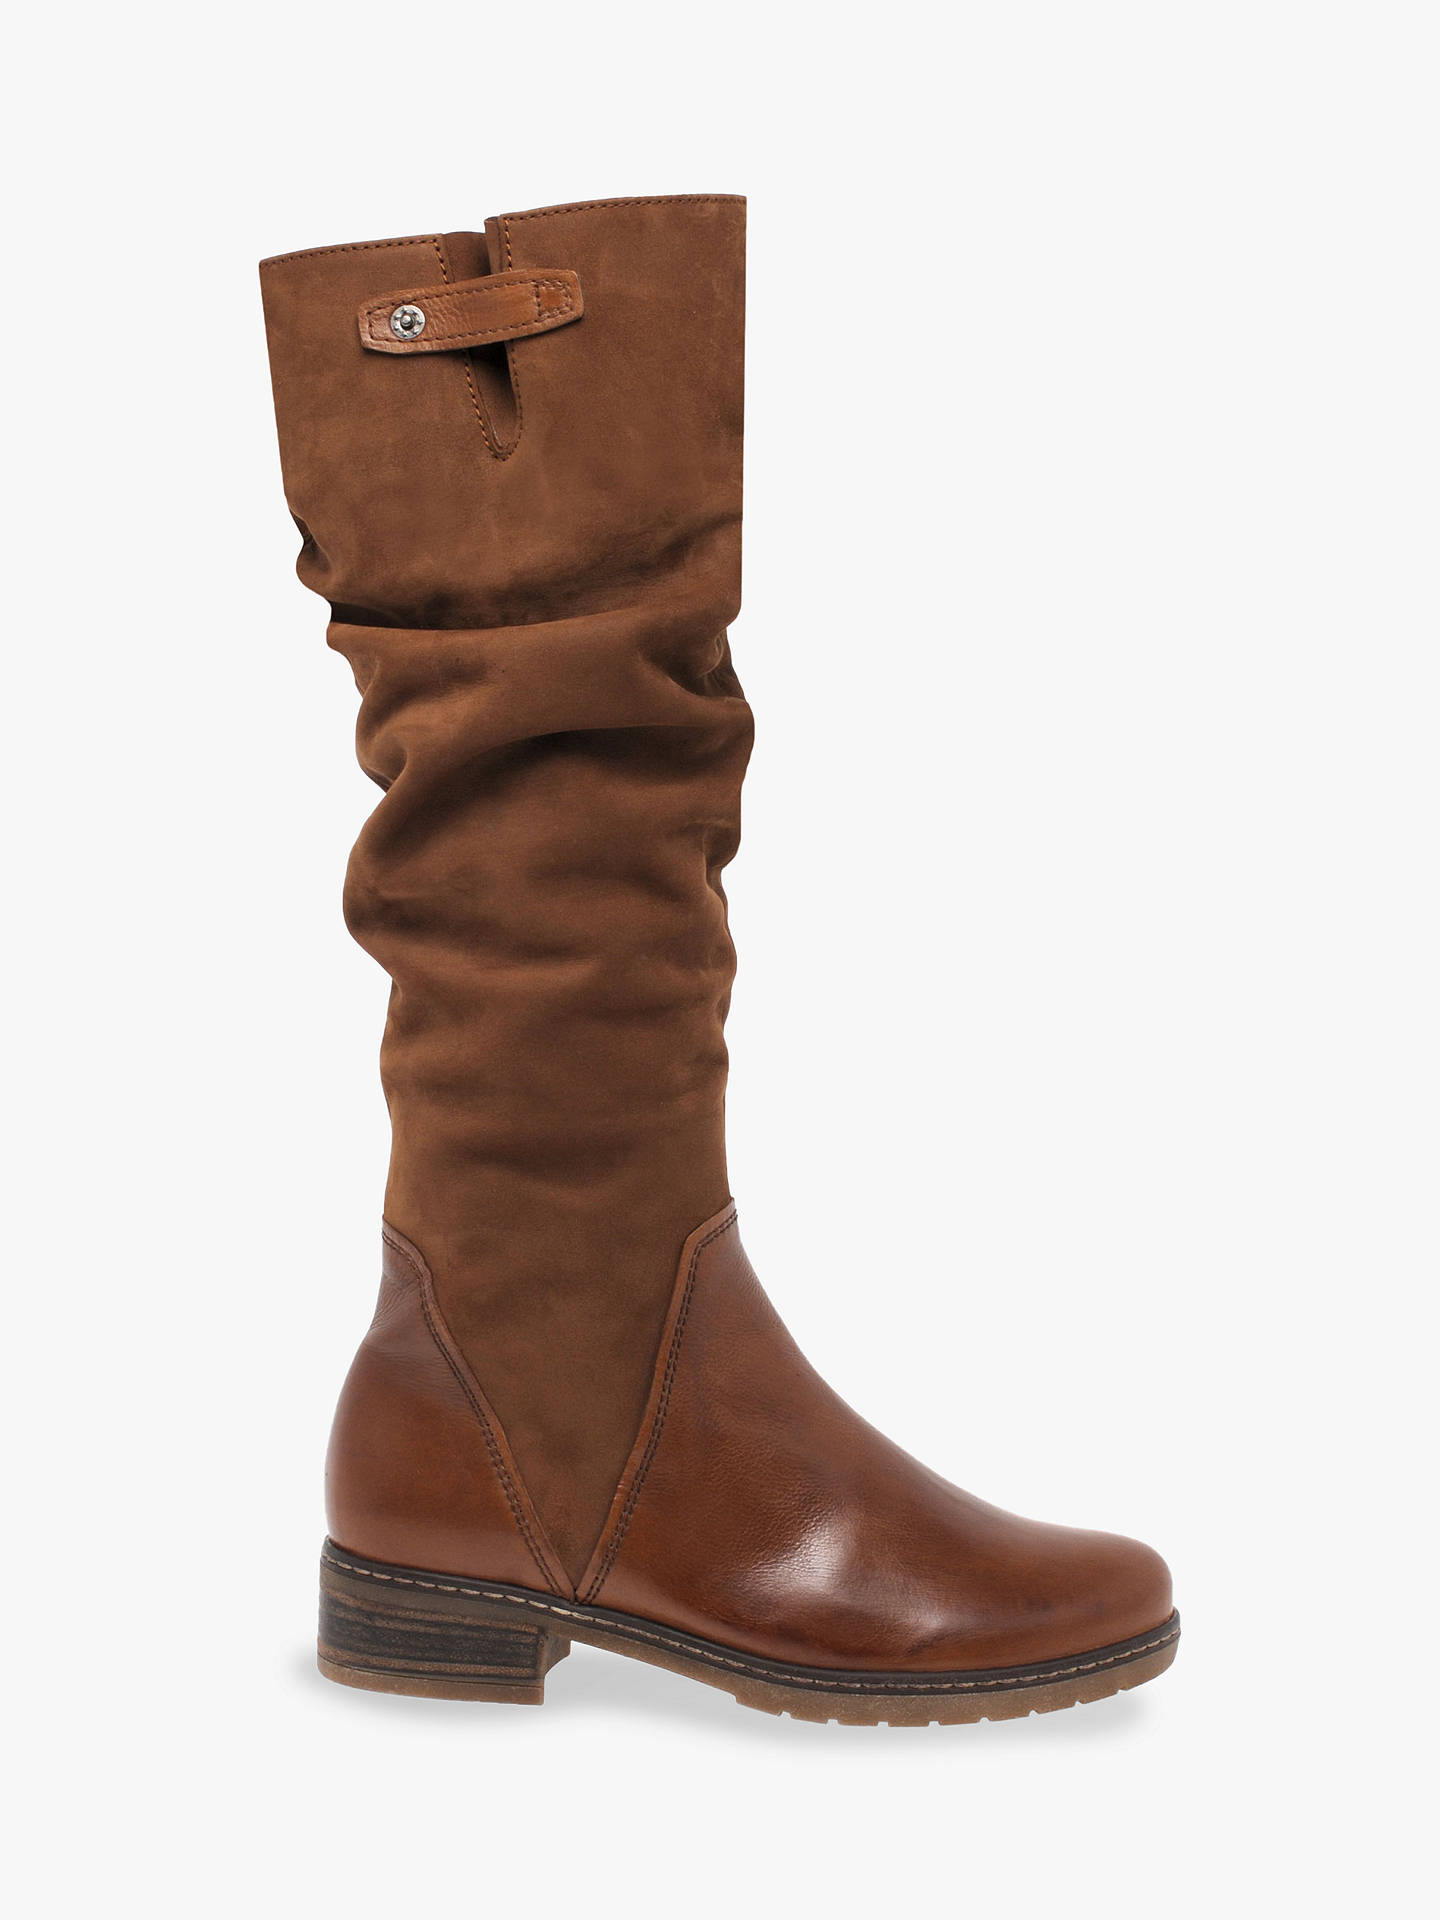 Gabor Dixie Wide Fit Suede Leather Knee High Boots, Cognac at John ...